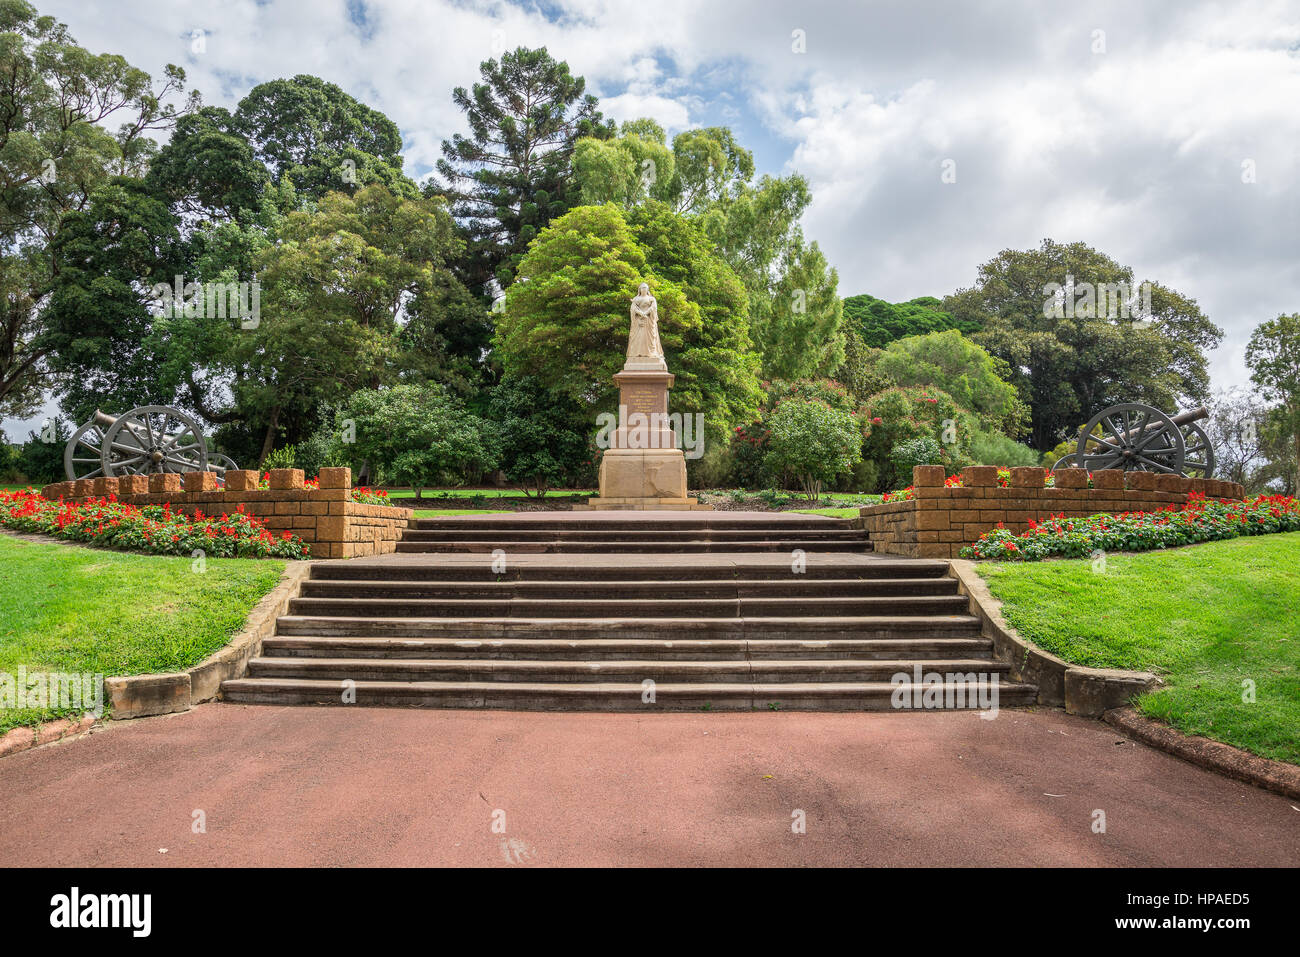 A statue of Queen Victoria in Kings Park and Botanical Gardens in Perth, Western Australia Stock Photo